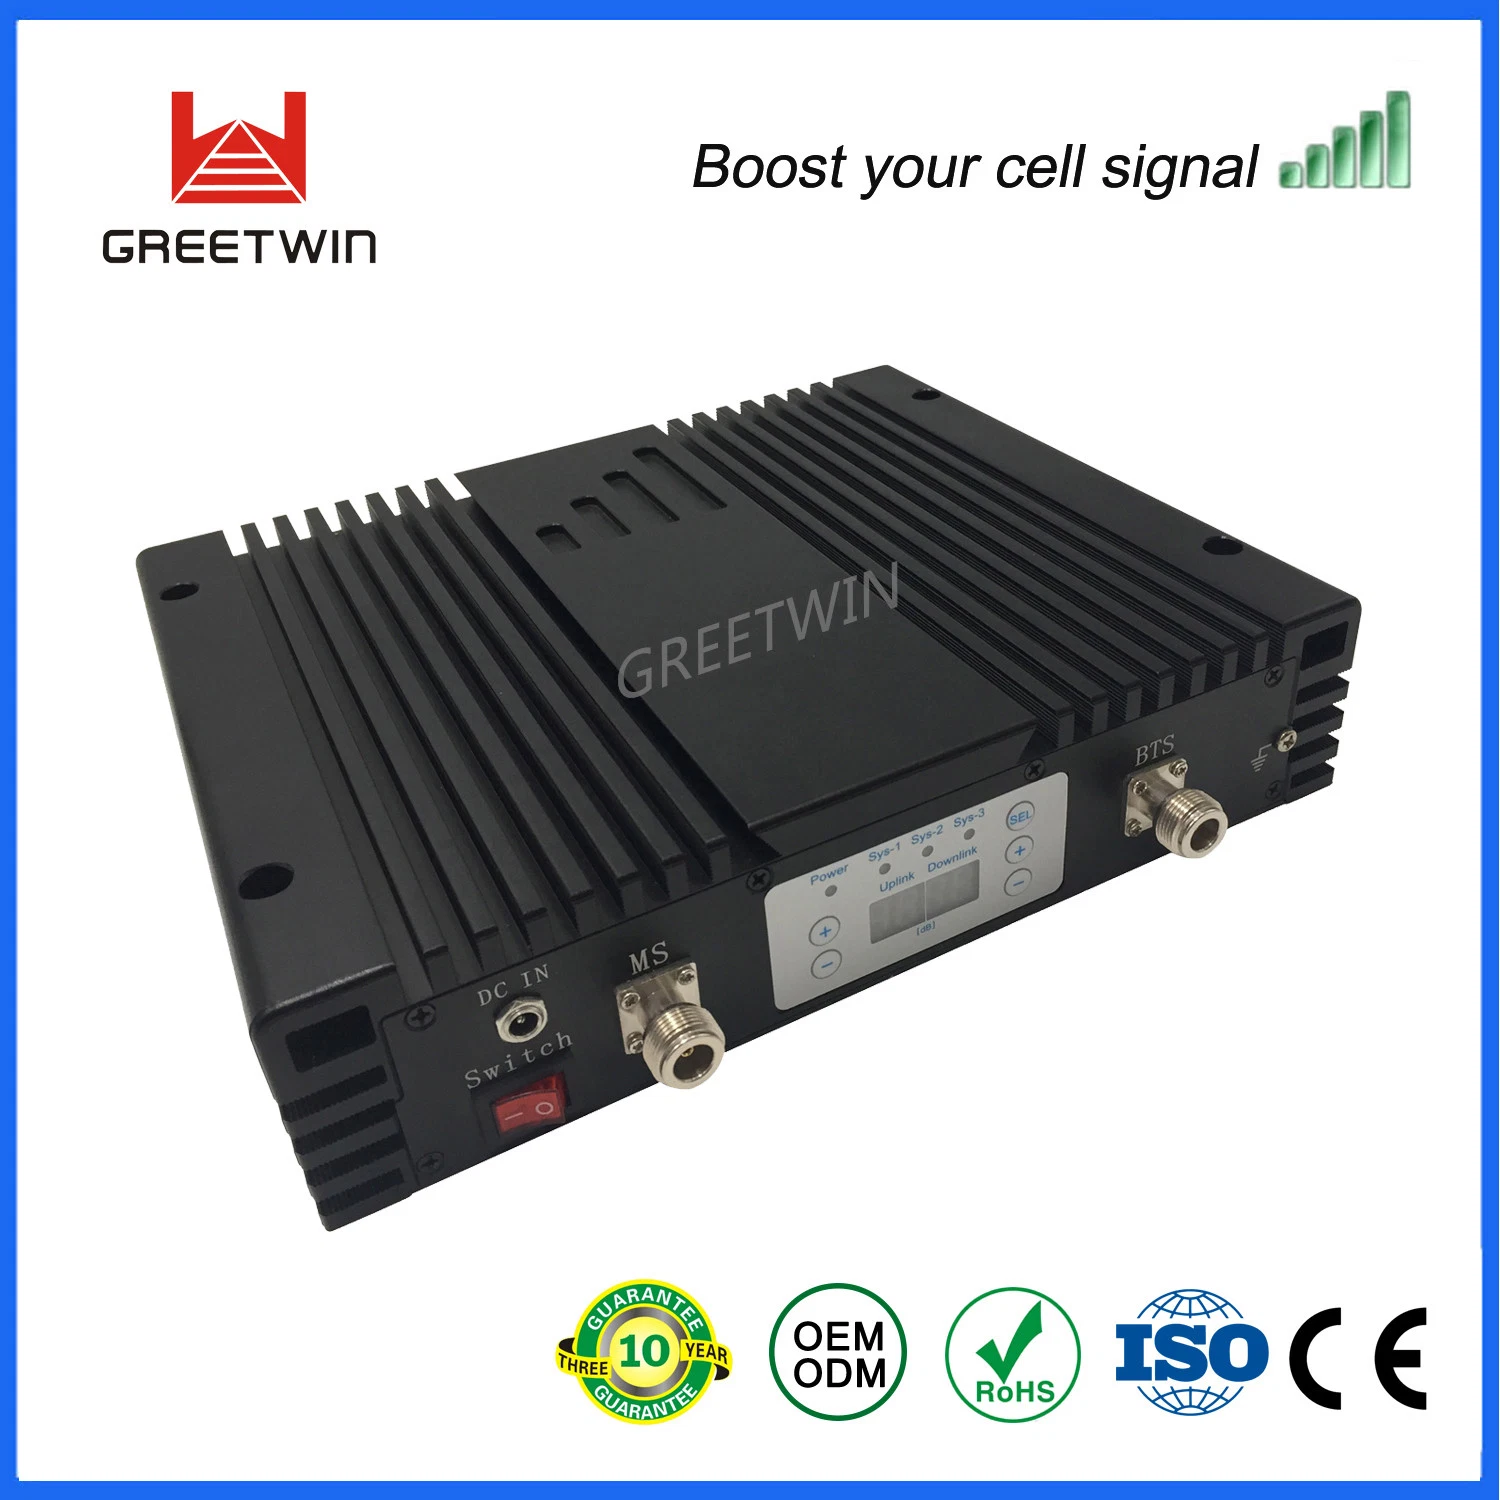 23dBm Lte700 Aws1700 Dual Band Booster for Office (GW-23LA)